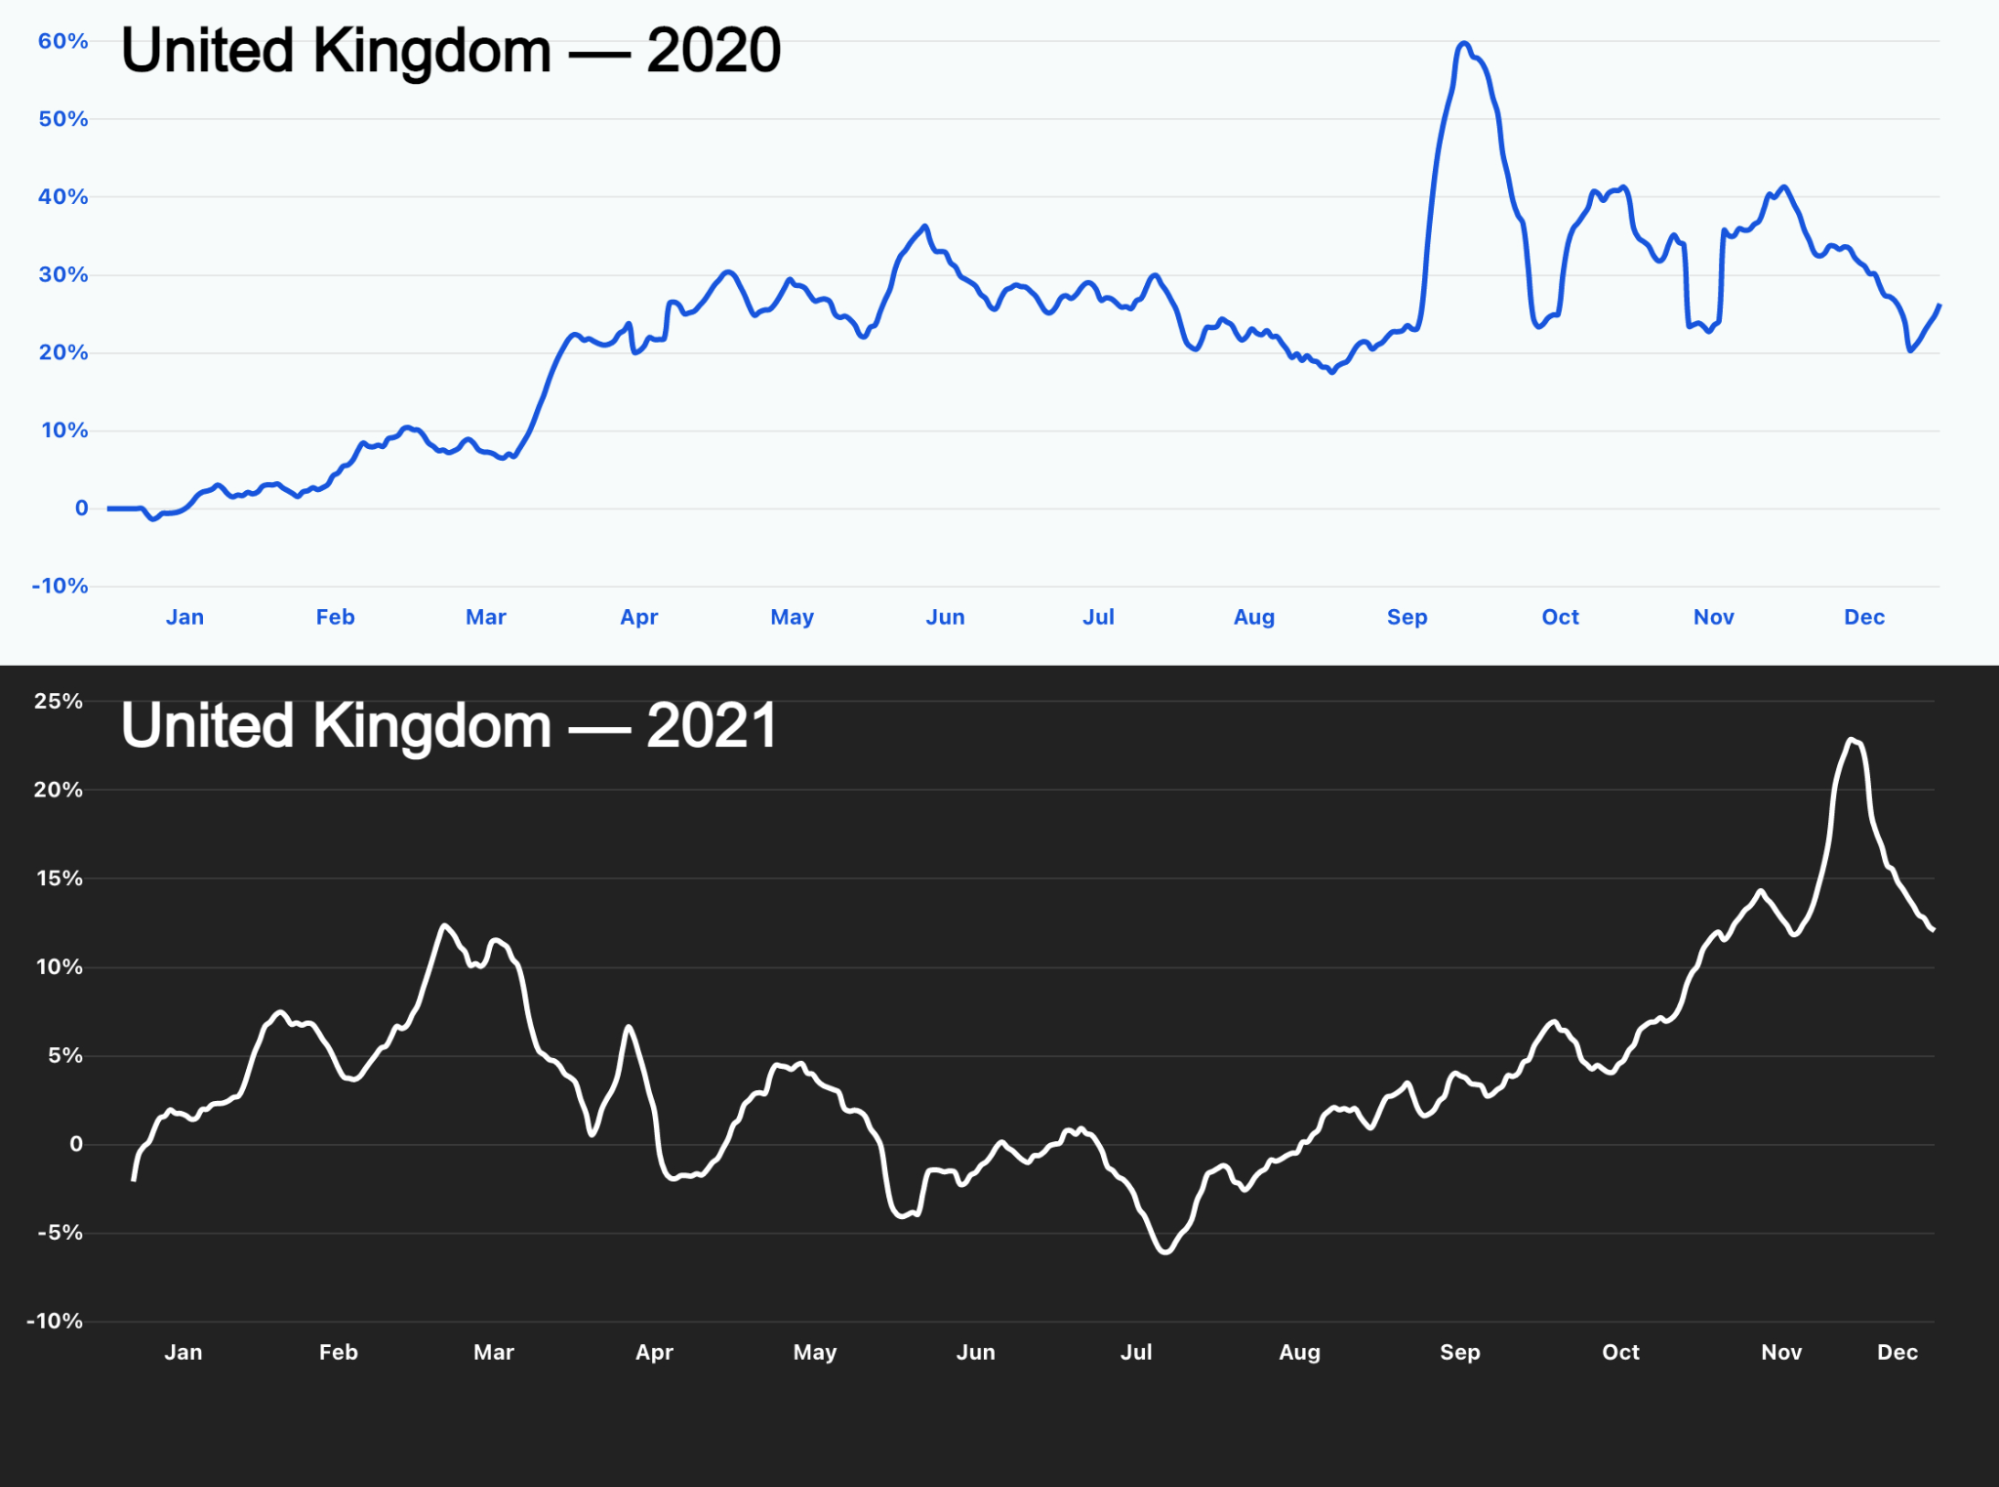 The lines here show Internet traffic growth from our standpoint throughout 2020 and 2021 in the UK